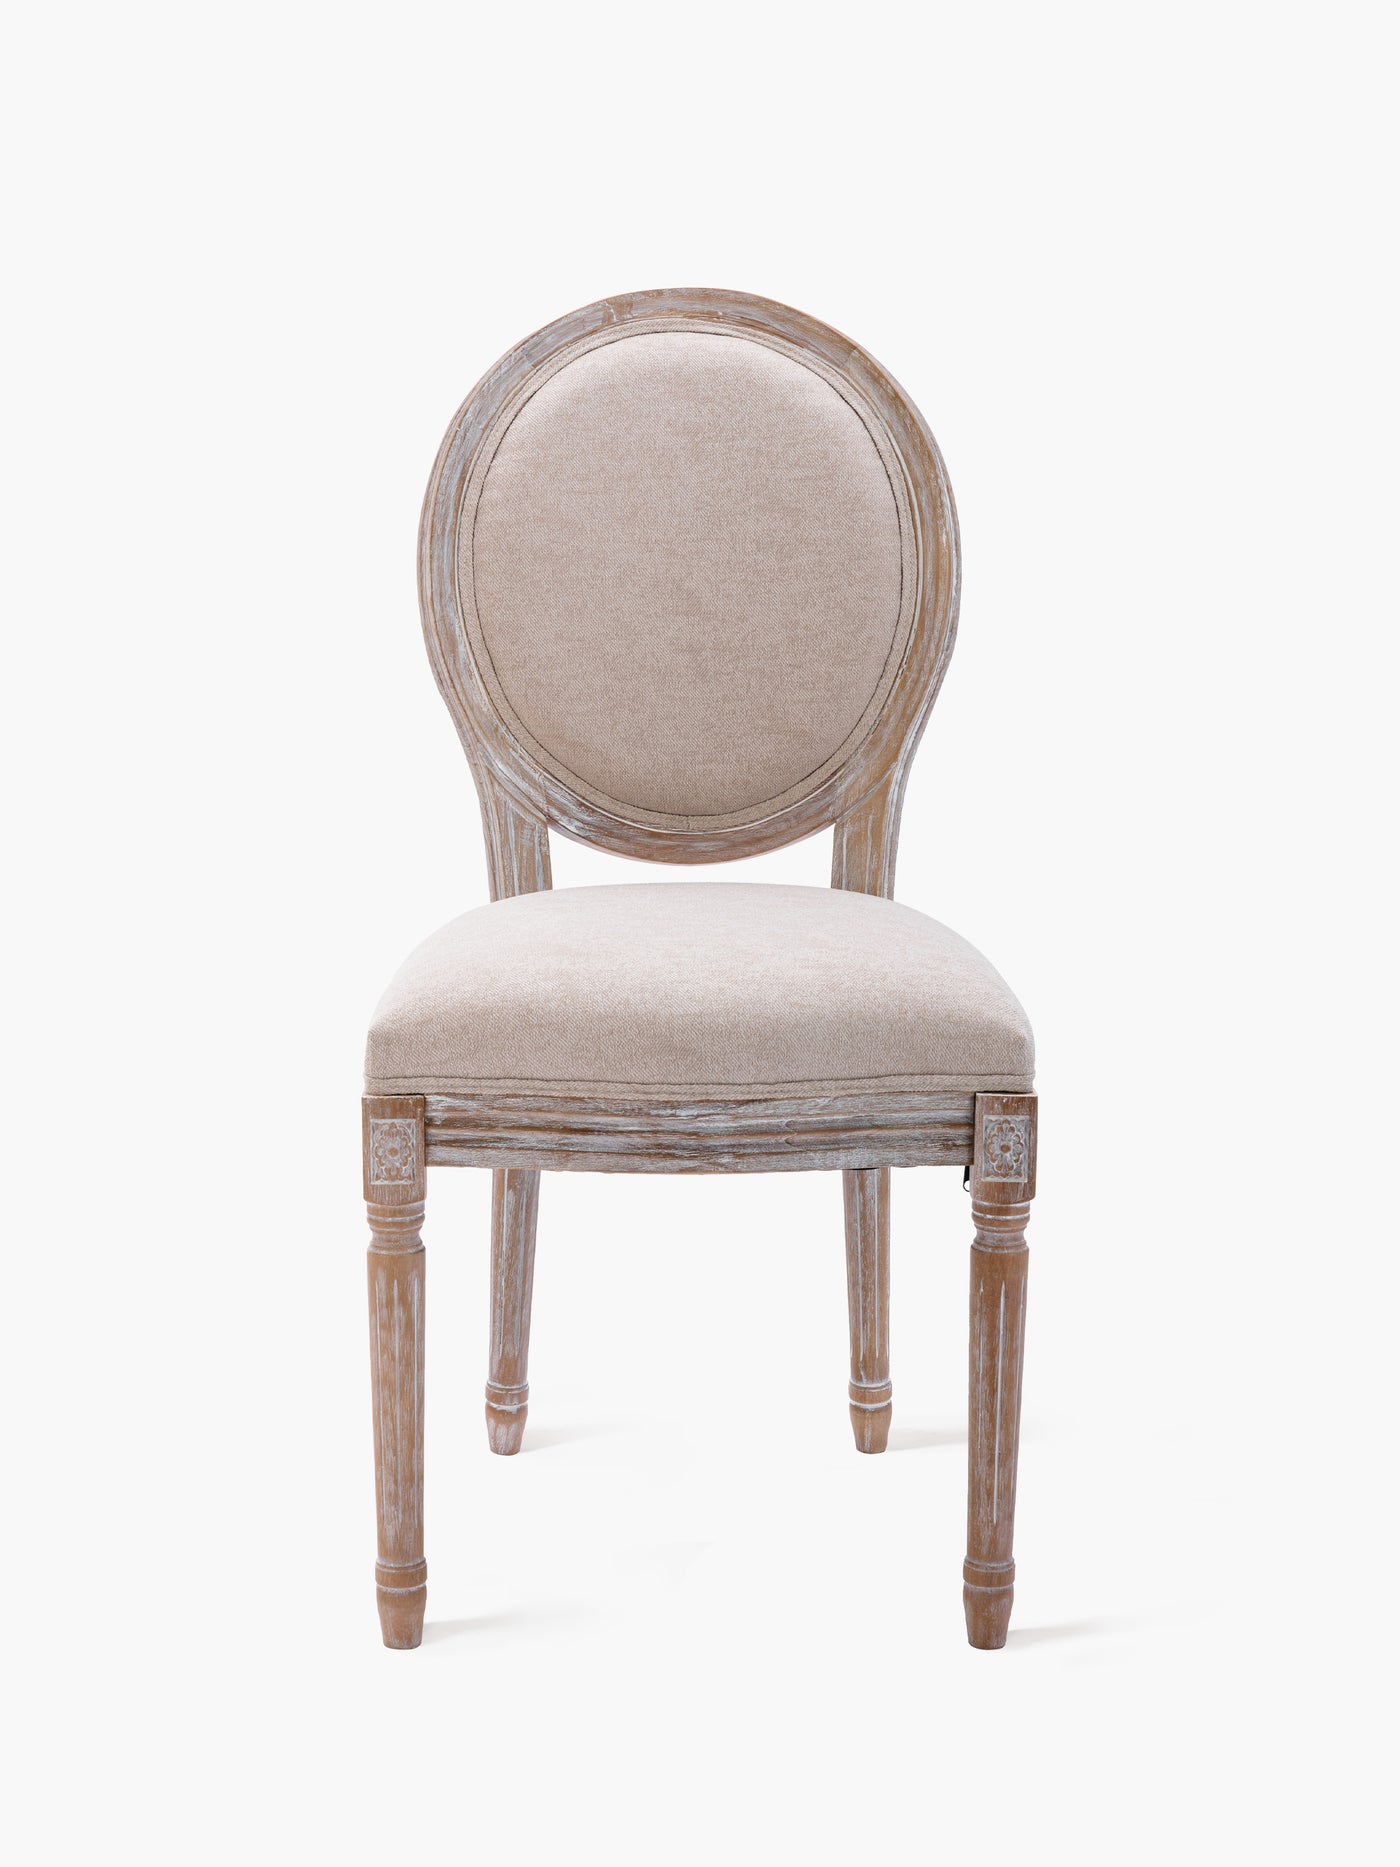 COLAMY Upholstered Farmhouse Dining Room Chairs with Round Back in Beige #color_beige